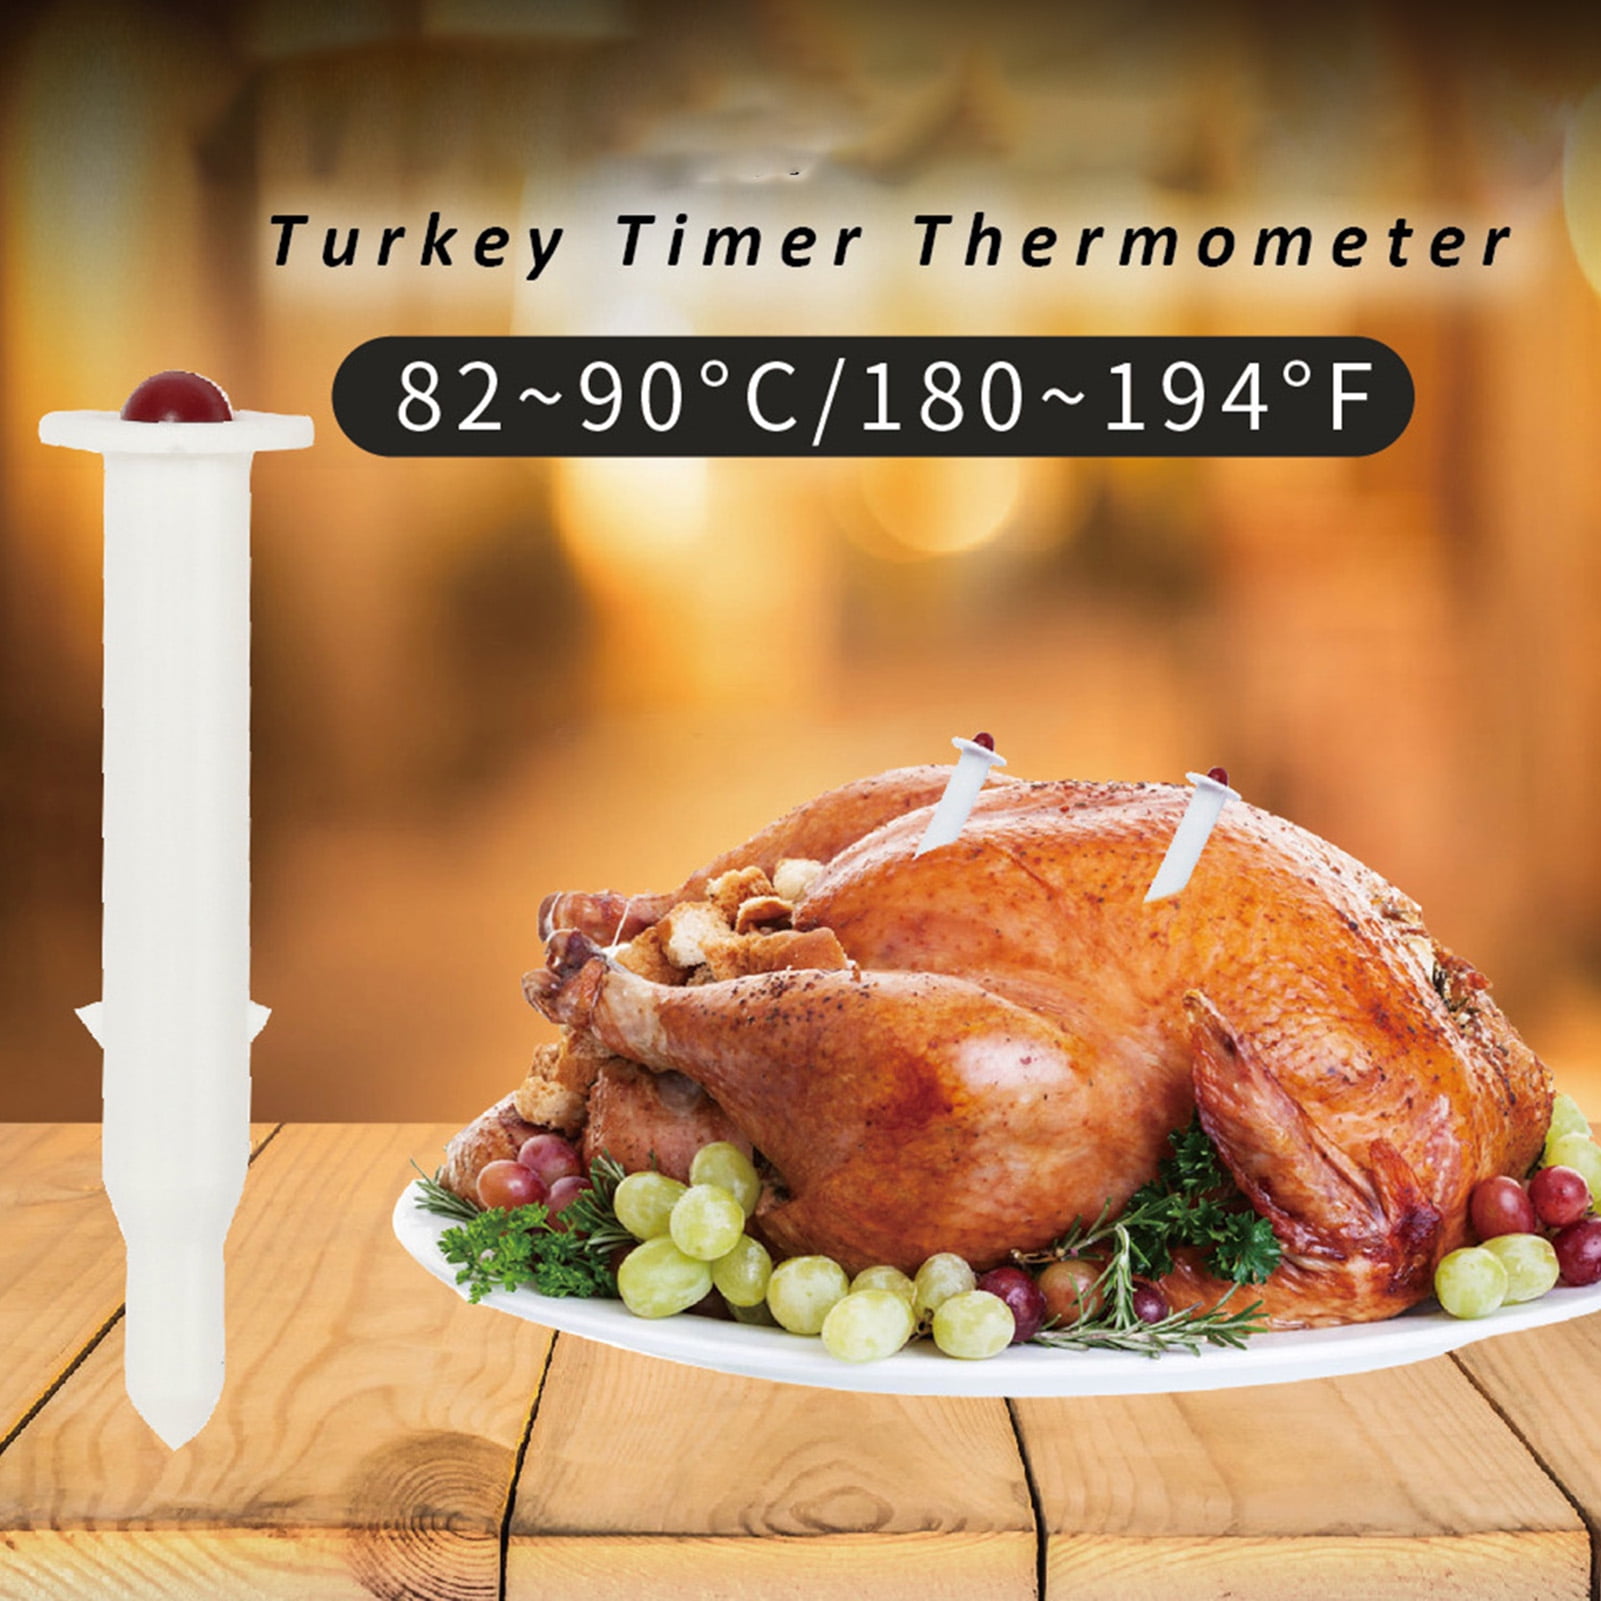  Regency Wraps Disposable Cooking Thermometer for Turkey,  Red-Button Automatically Pops-Up When Turkey Reaches 180°, Oven, Microwave  & Air Fryer Safe, Pack of 2: Home & Kitchen